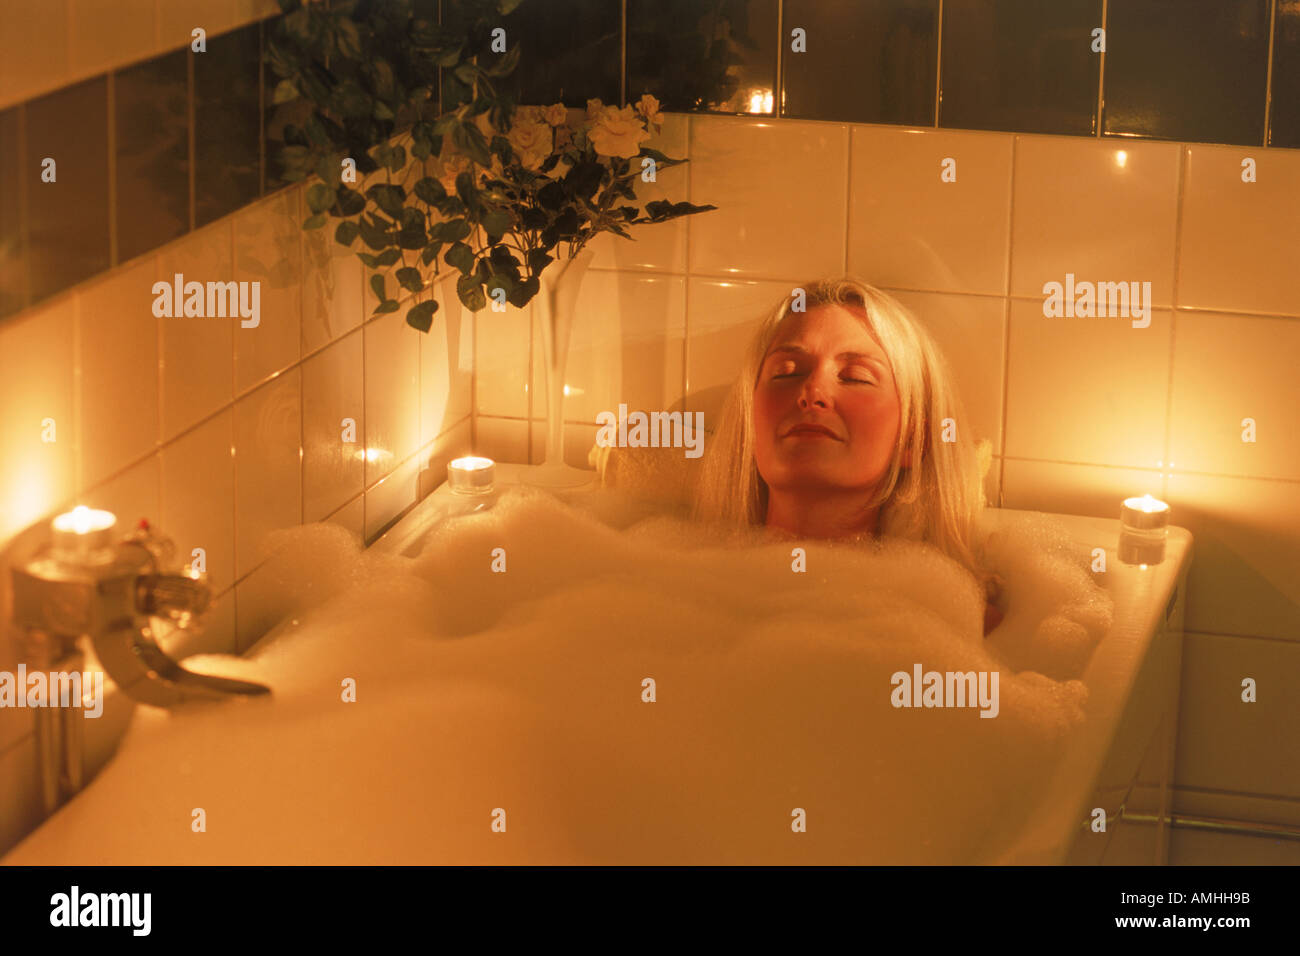 Candle lit bubble bath for relaxed blond woman Stock Photo